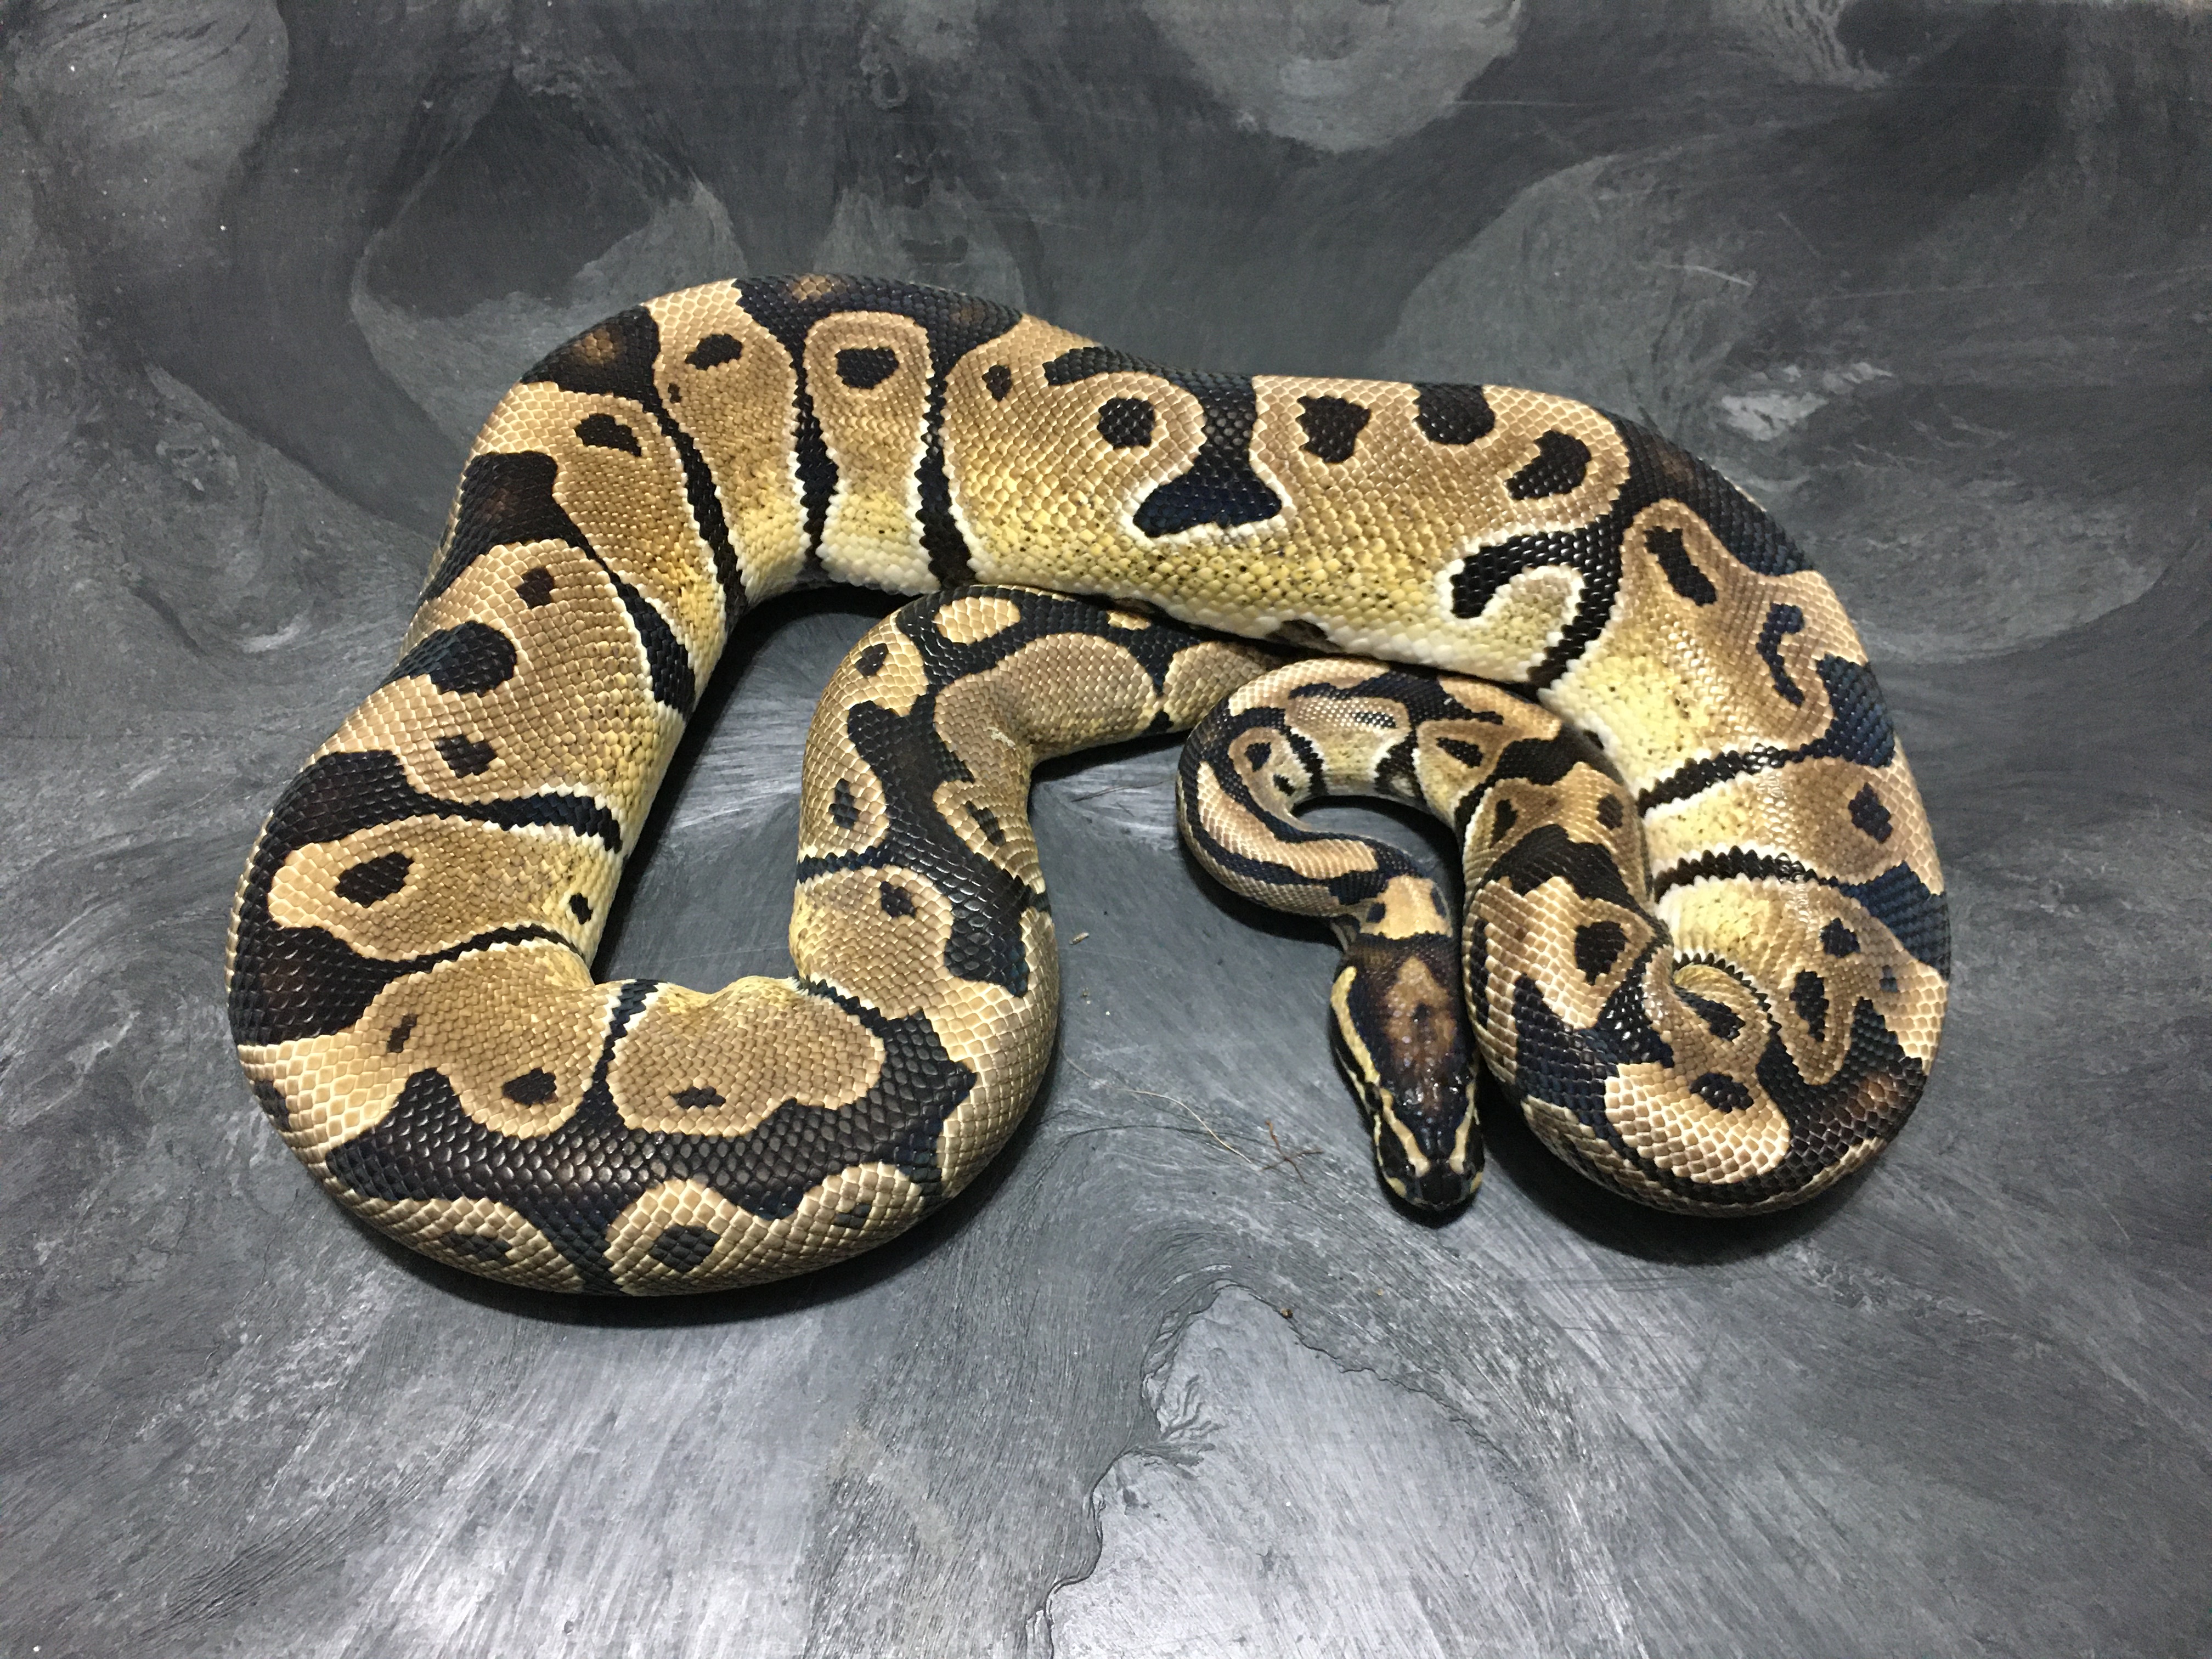 Mario Ball Python by The Serpent Chamber